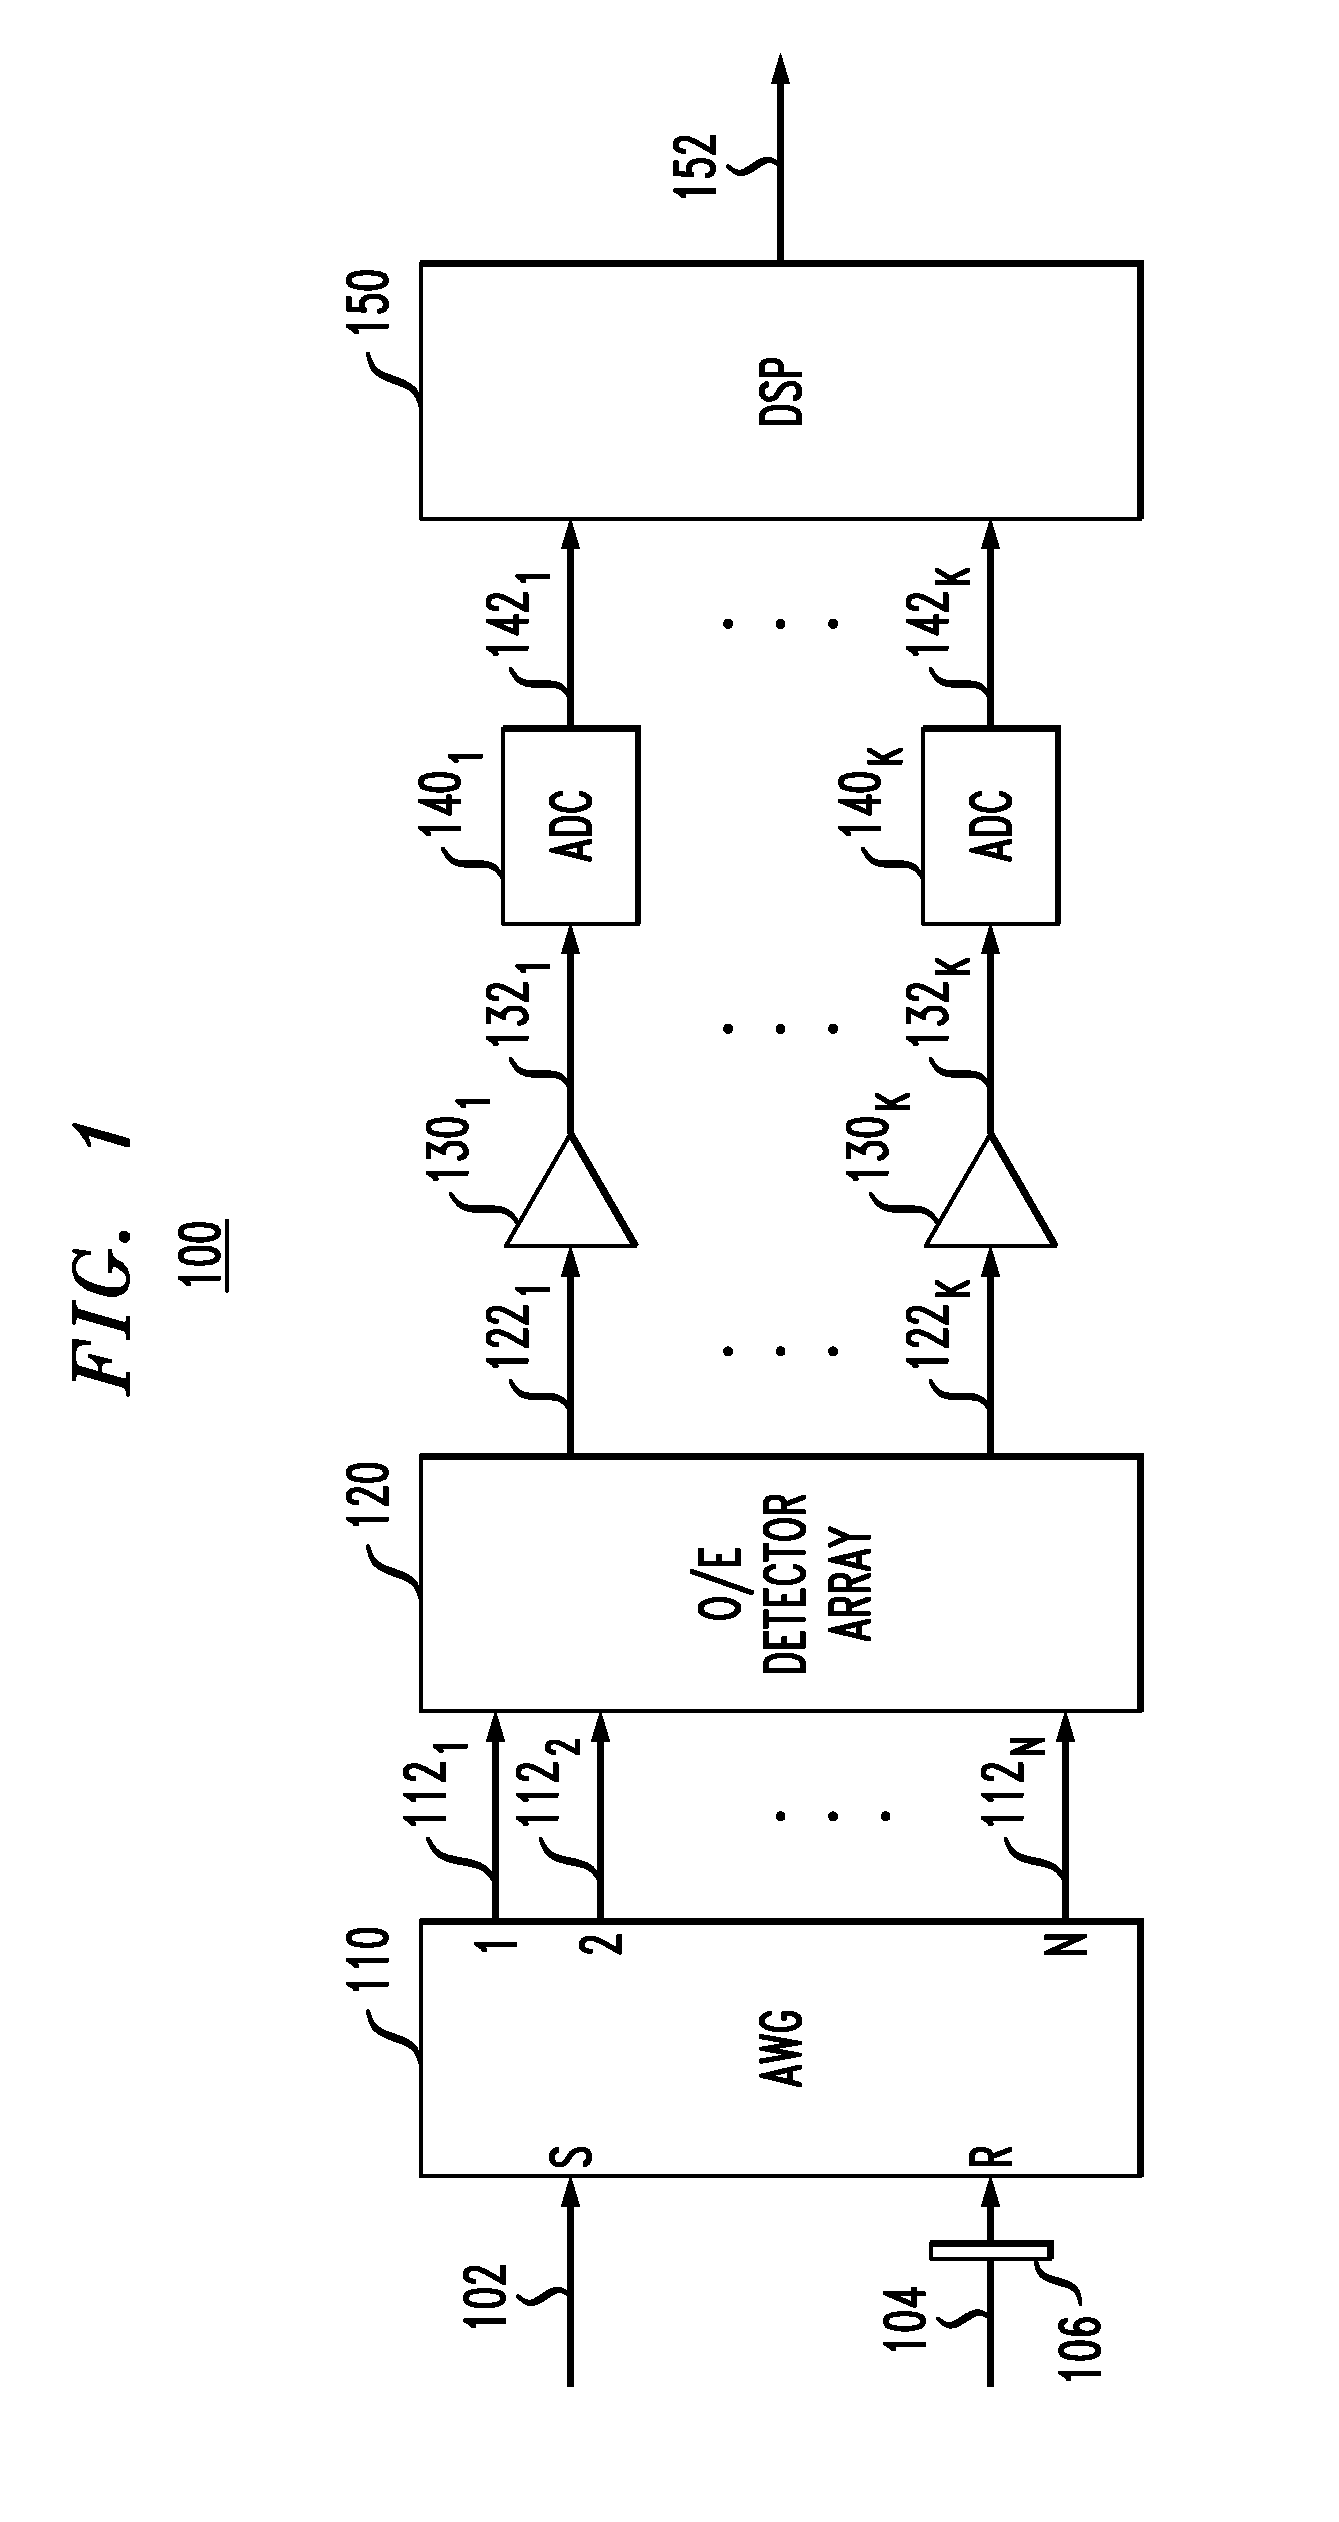 Coherent receiver having an interleave-chirped arrayed waveguide grating